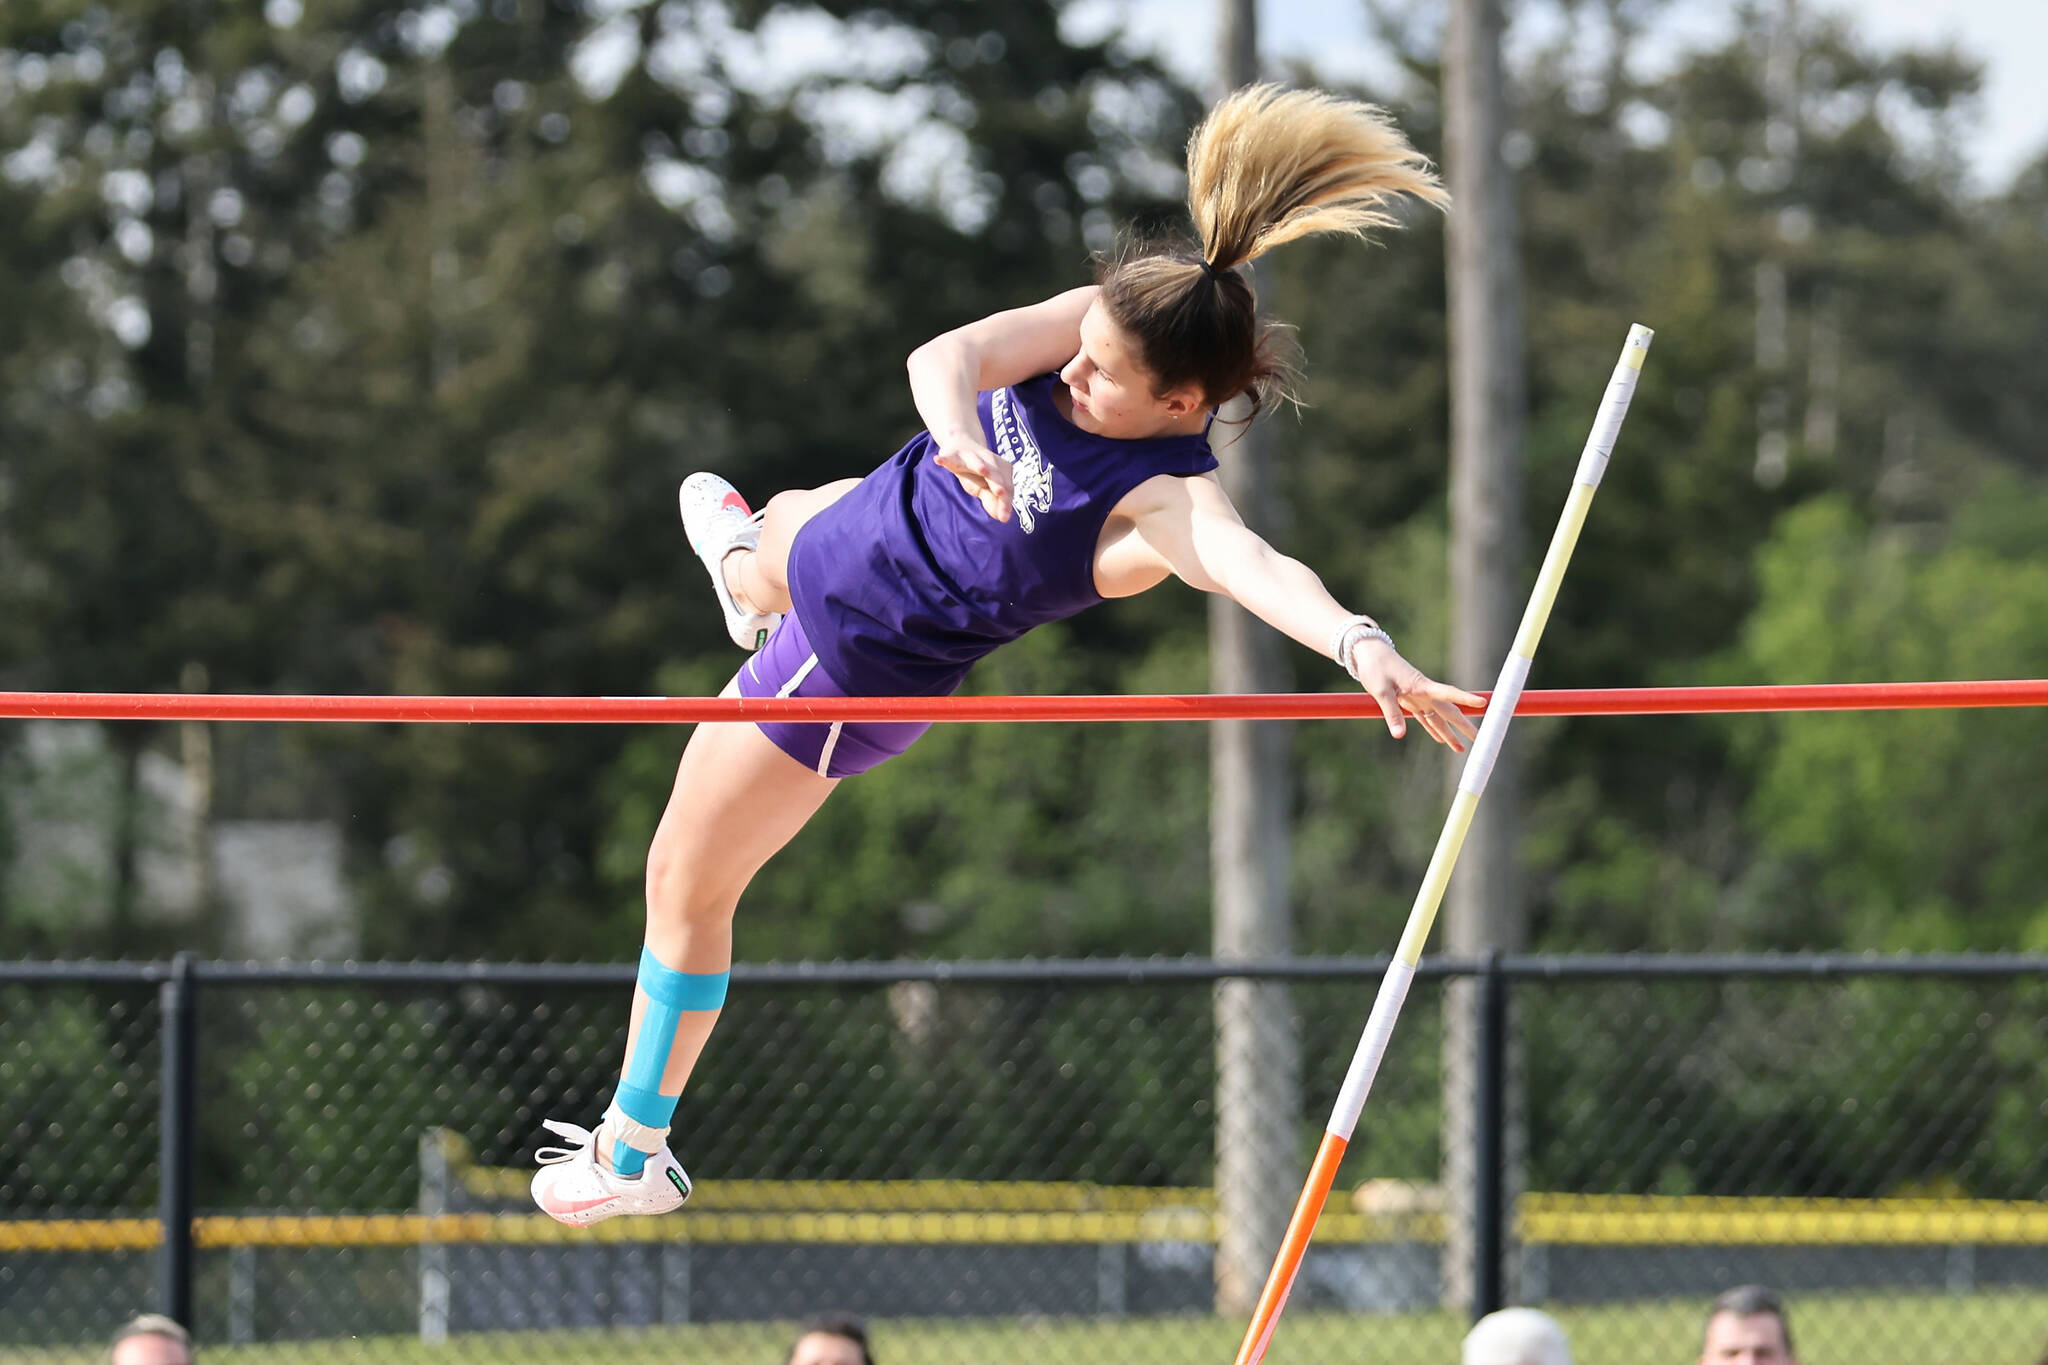 Photo by John Fisken
Sophomore Natalie Chadduck competes in the pole vault event. She won first place with a height of eight feet.